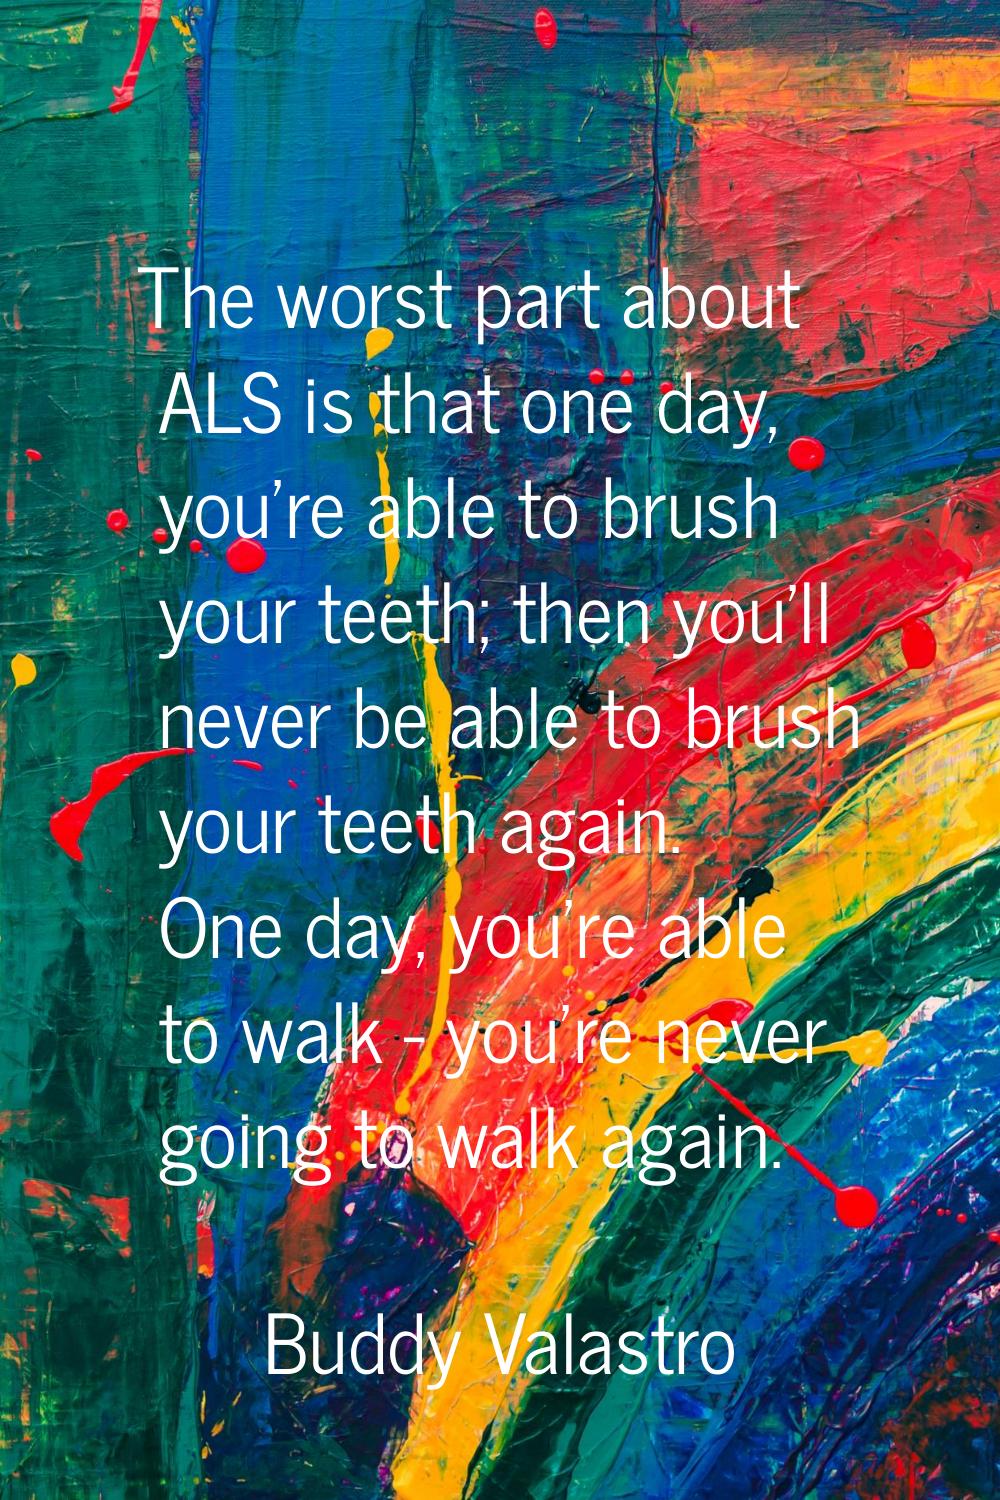 The worst part about ALS is that one day, you're able to brush your teeth; then you'll never be abl